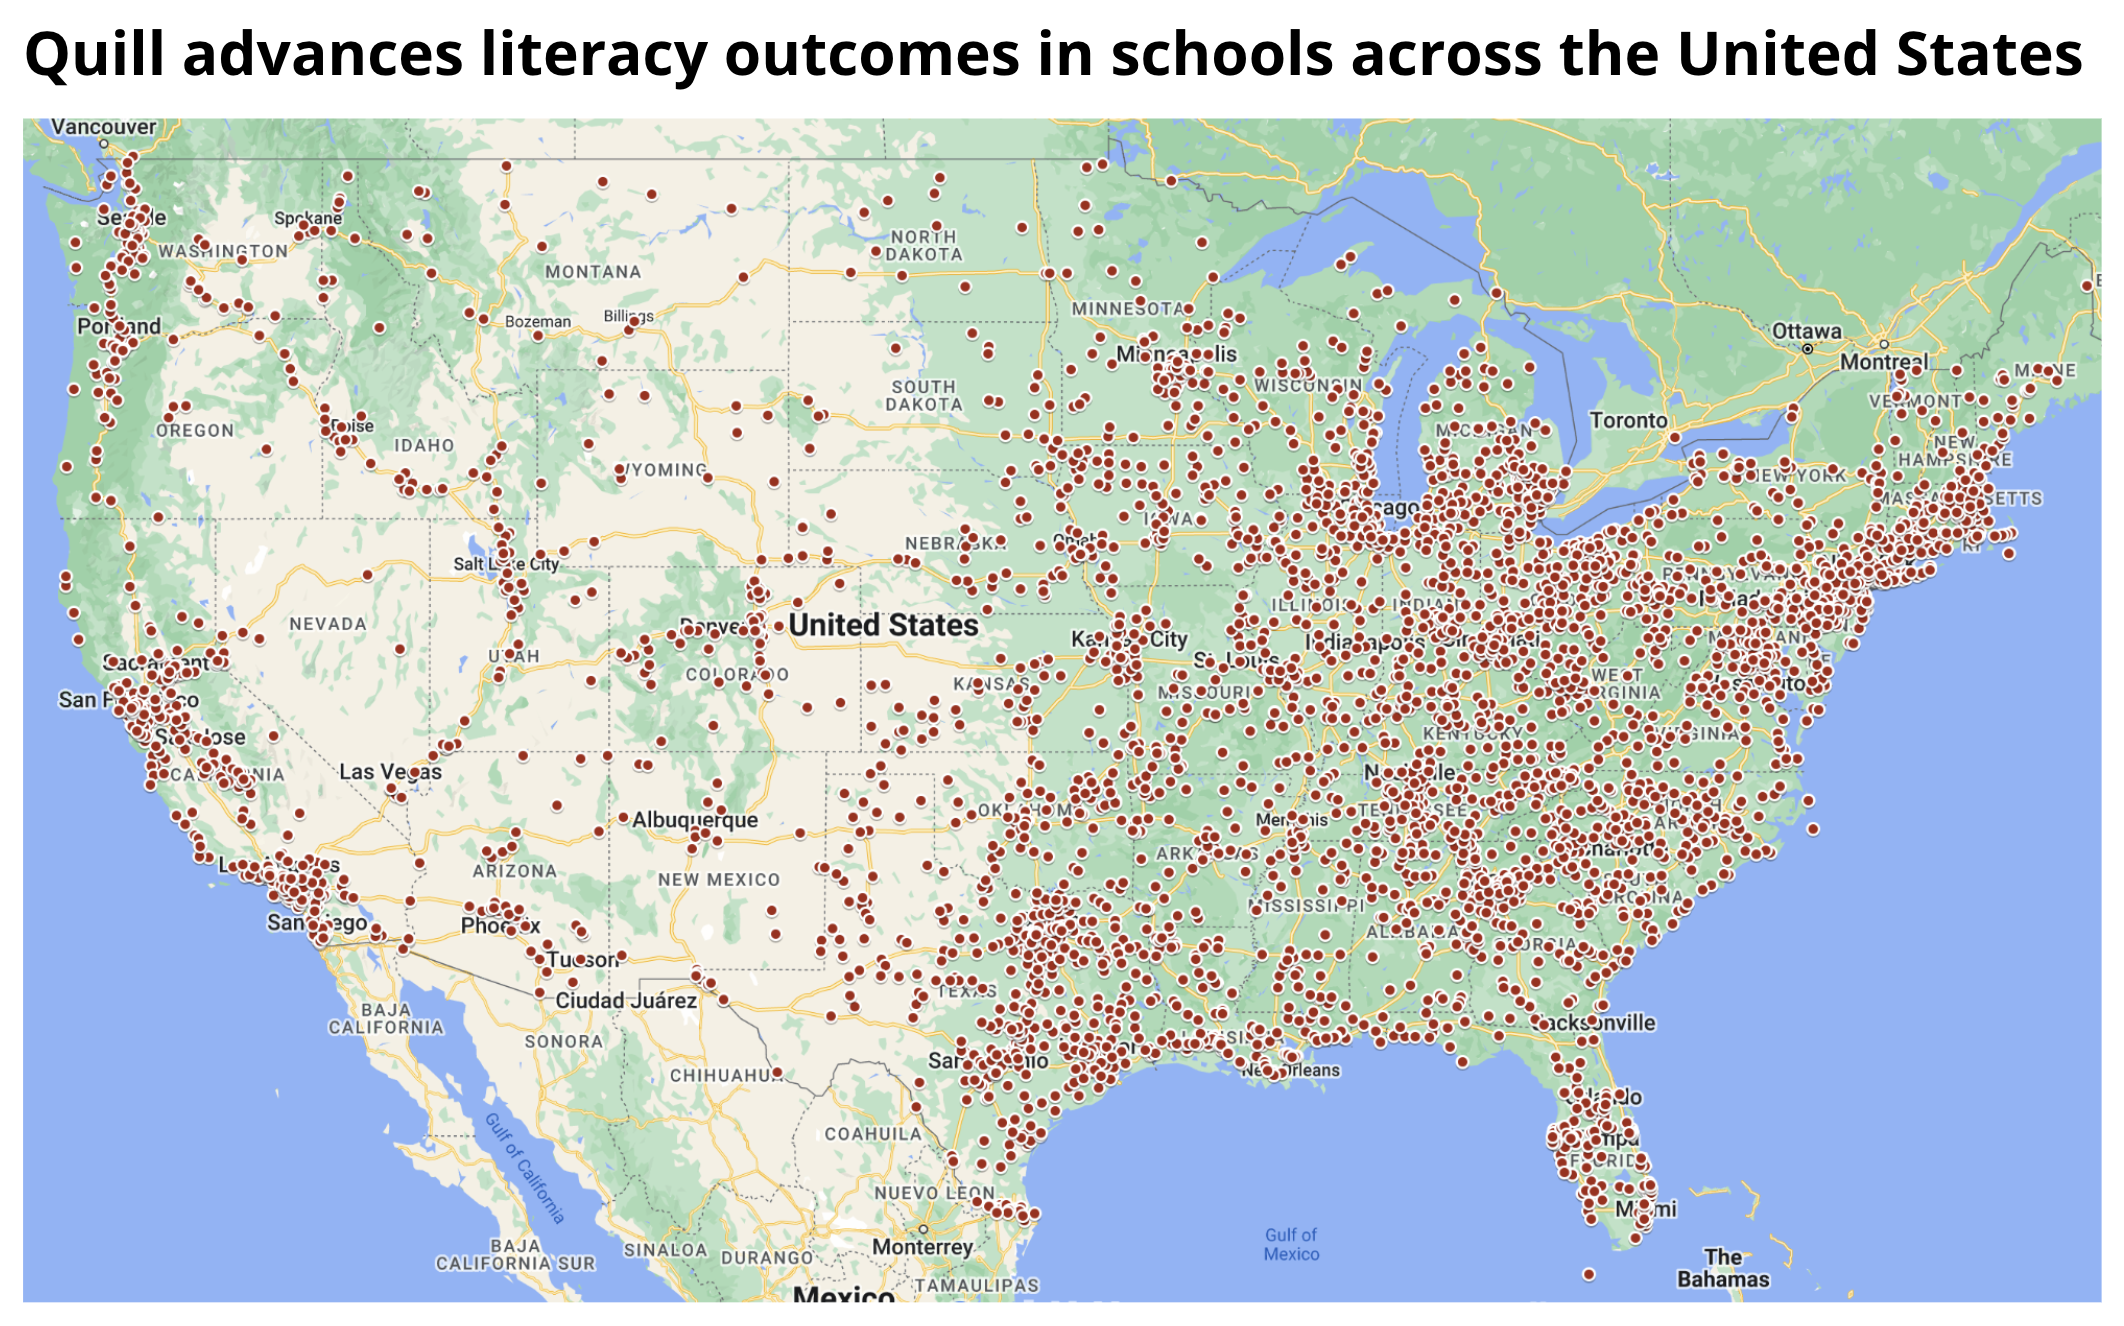 Map of the United States with red dots over every city with a school that uses Quill. Top of the image has text that says 'Quill advances literary outcomes in schools across the United States'.